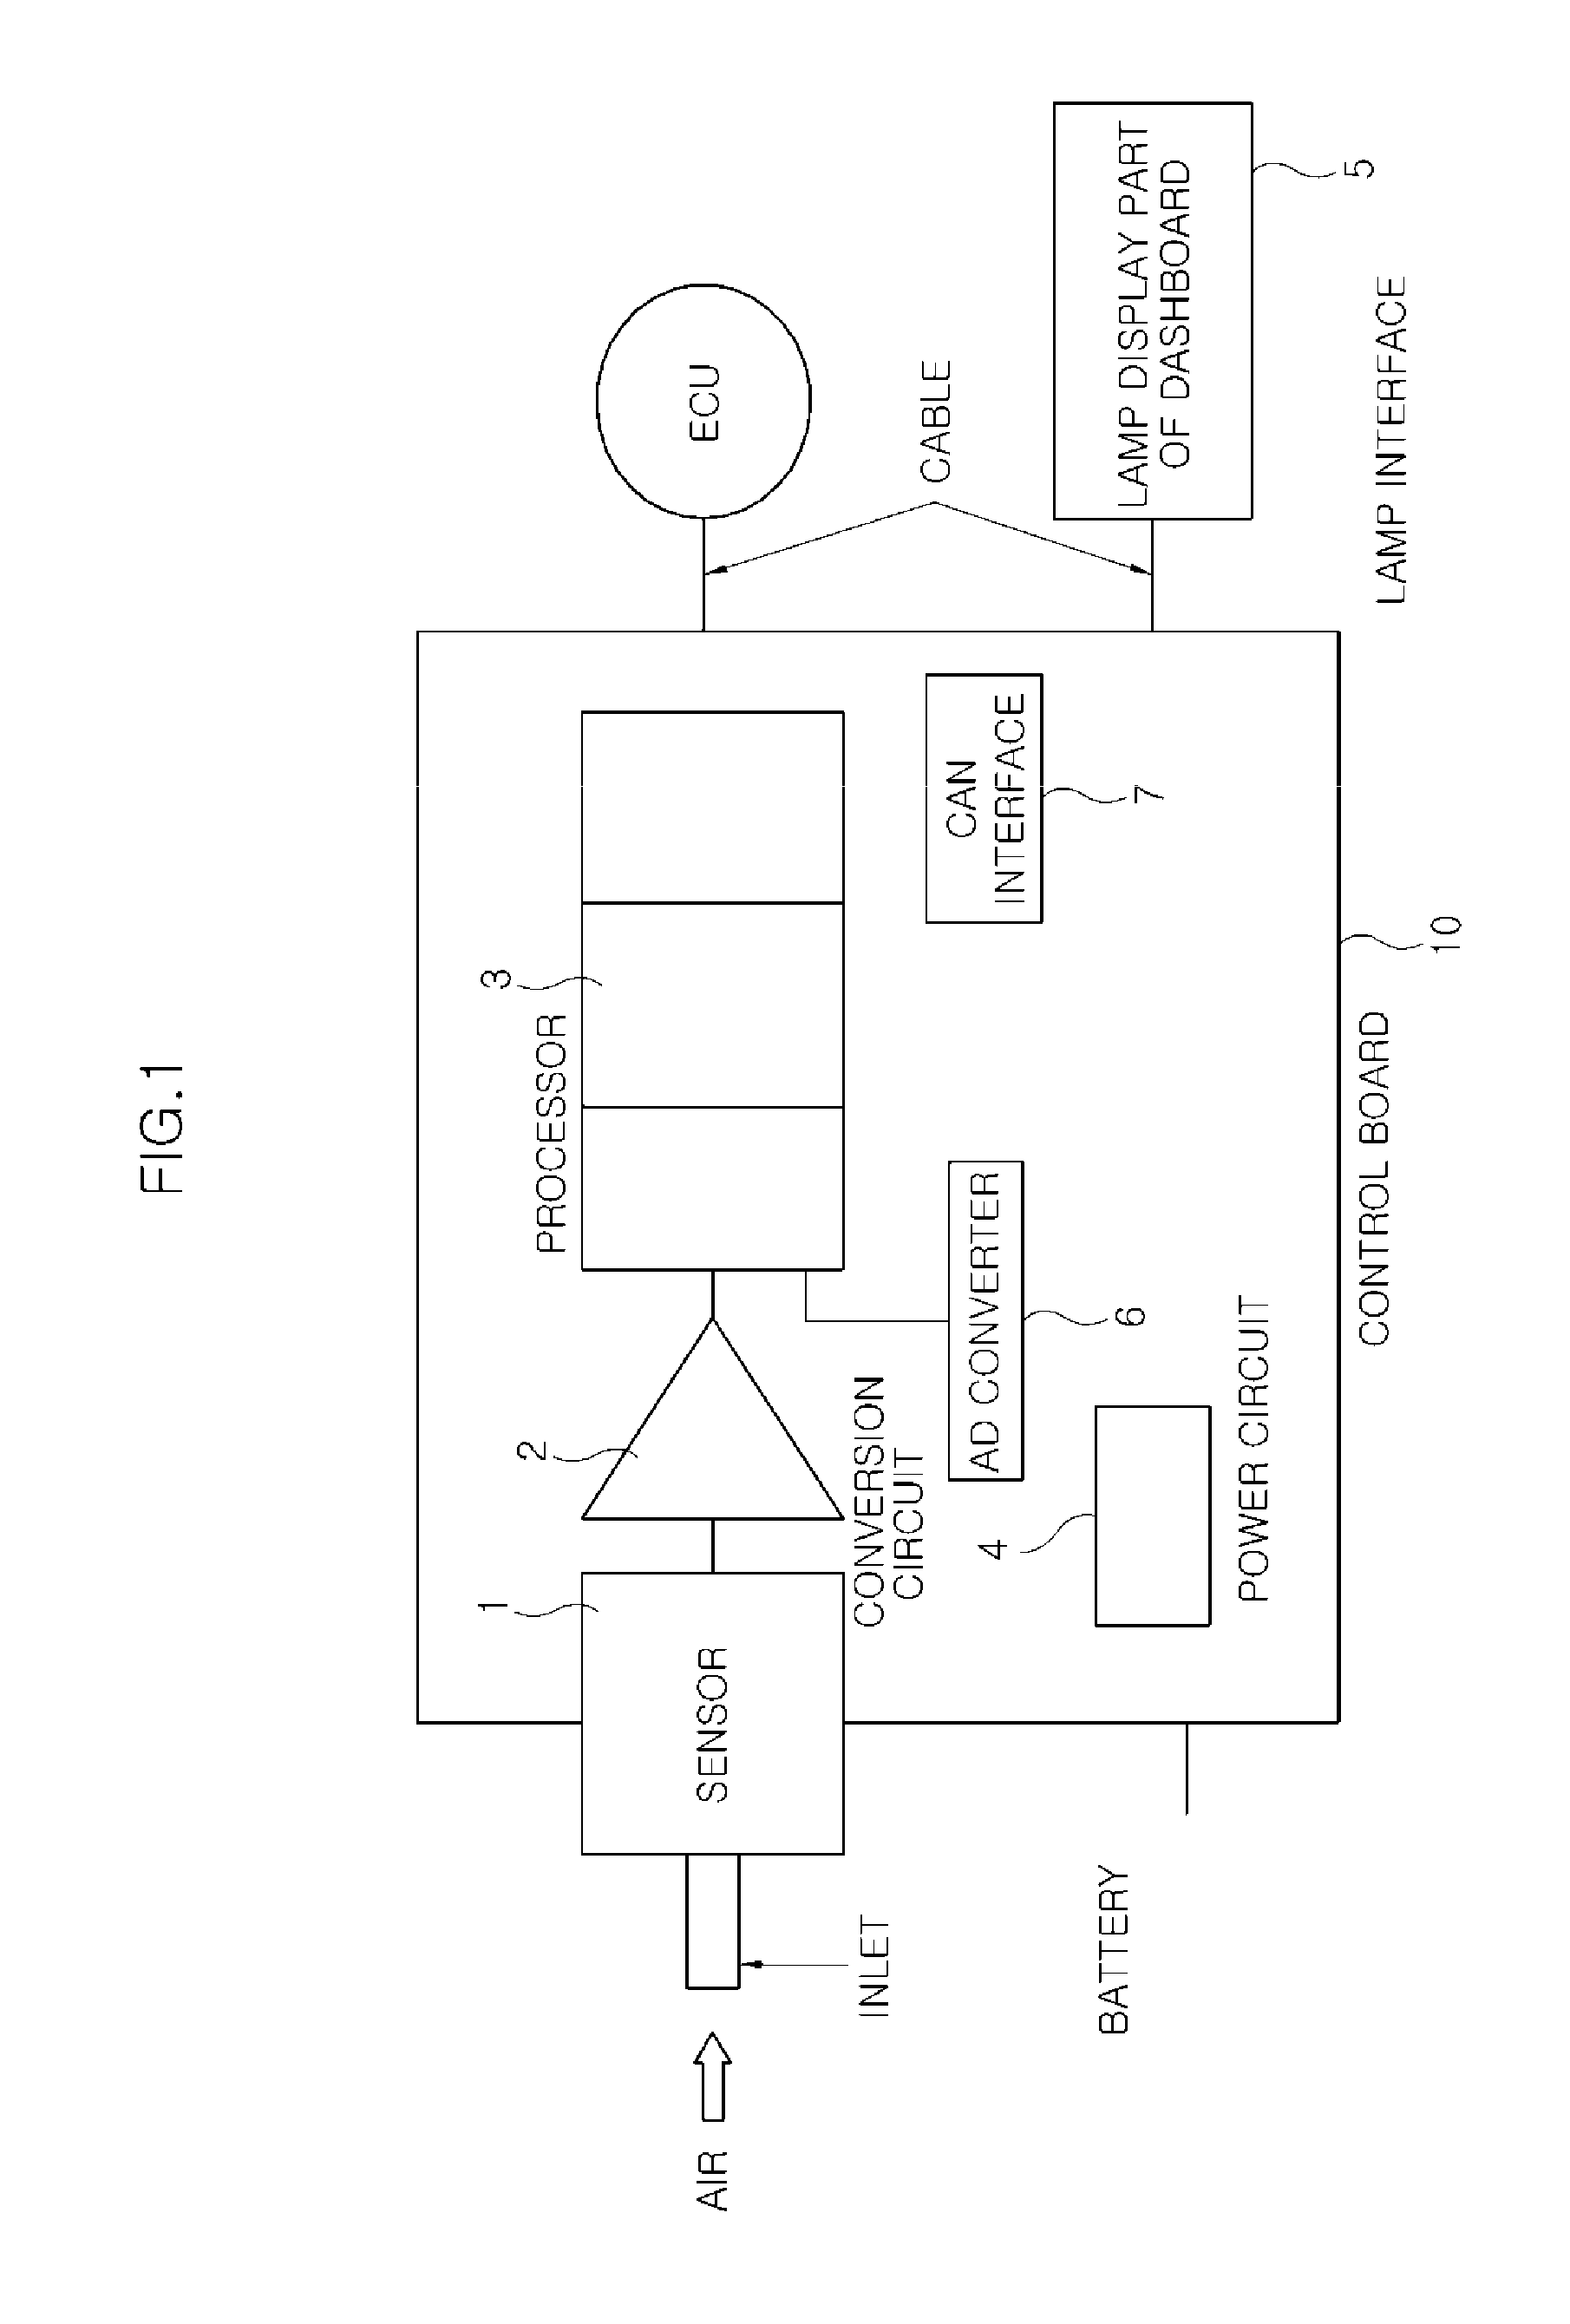 System for checking filter of air cleaner for automobiles